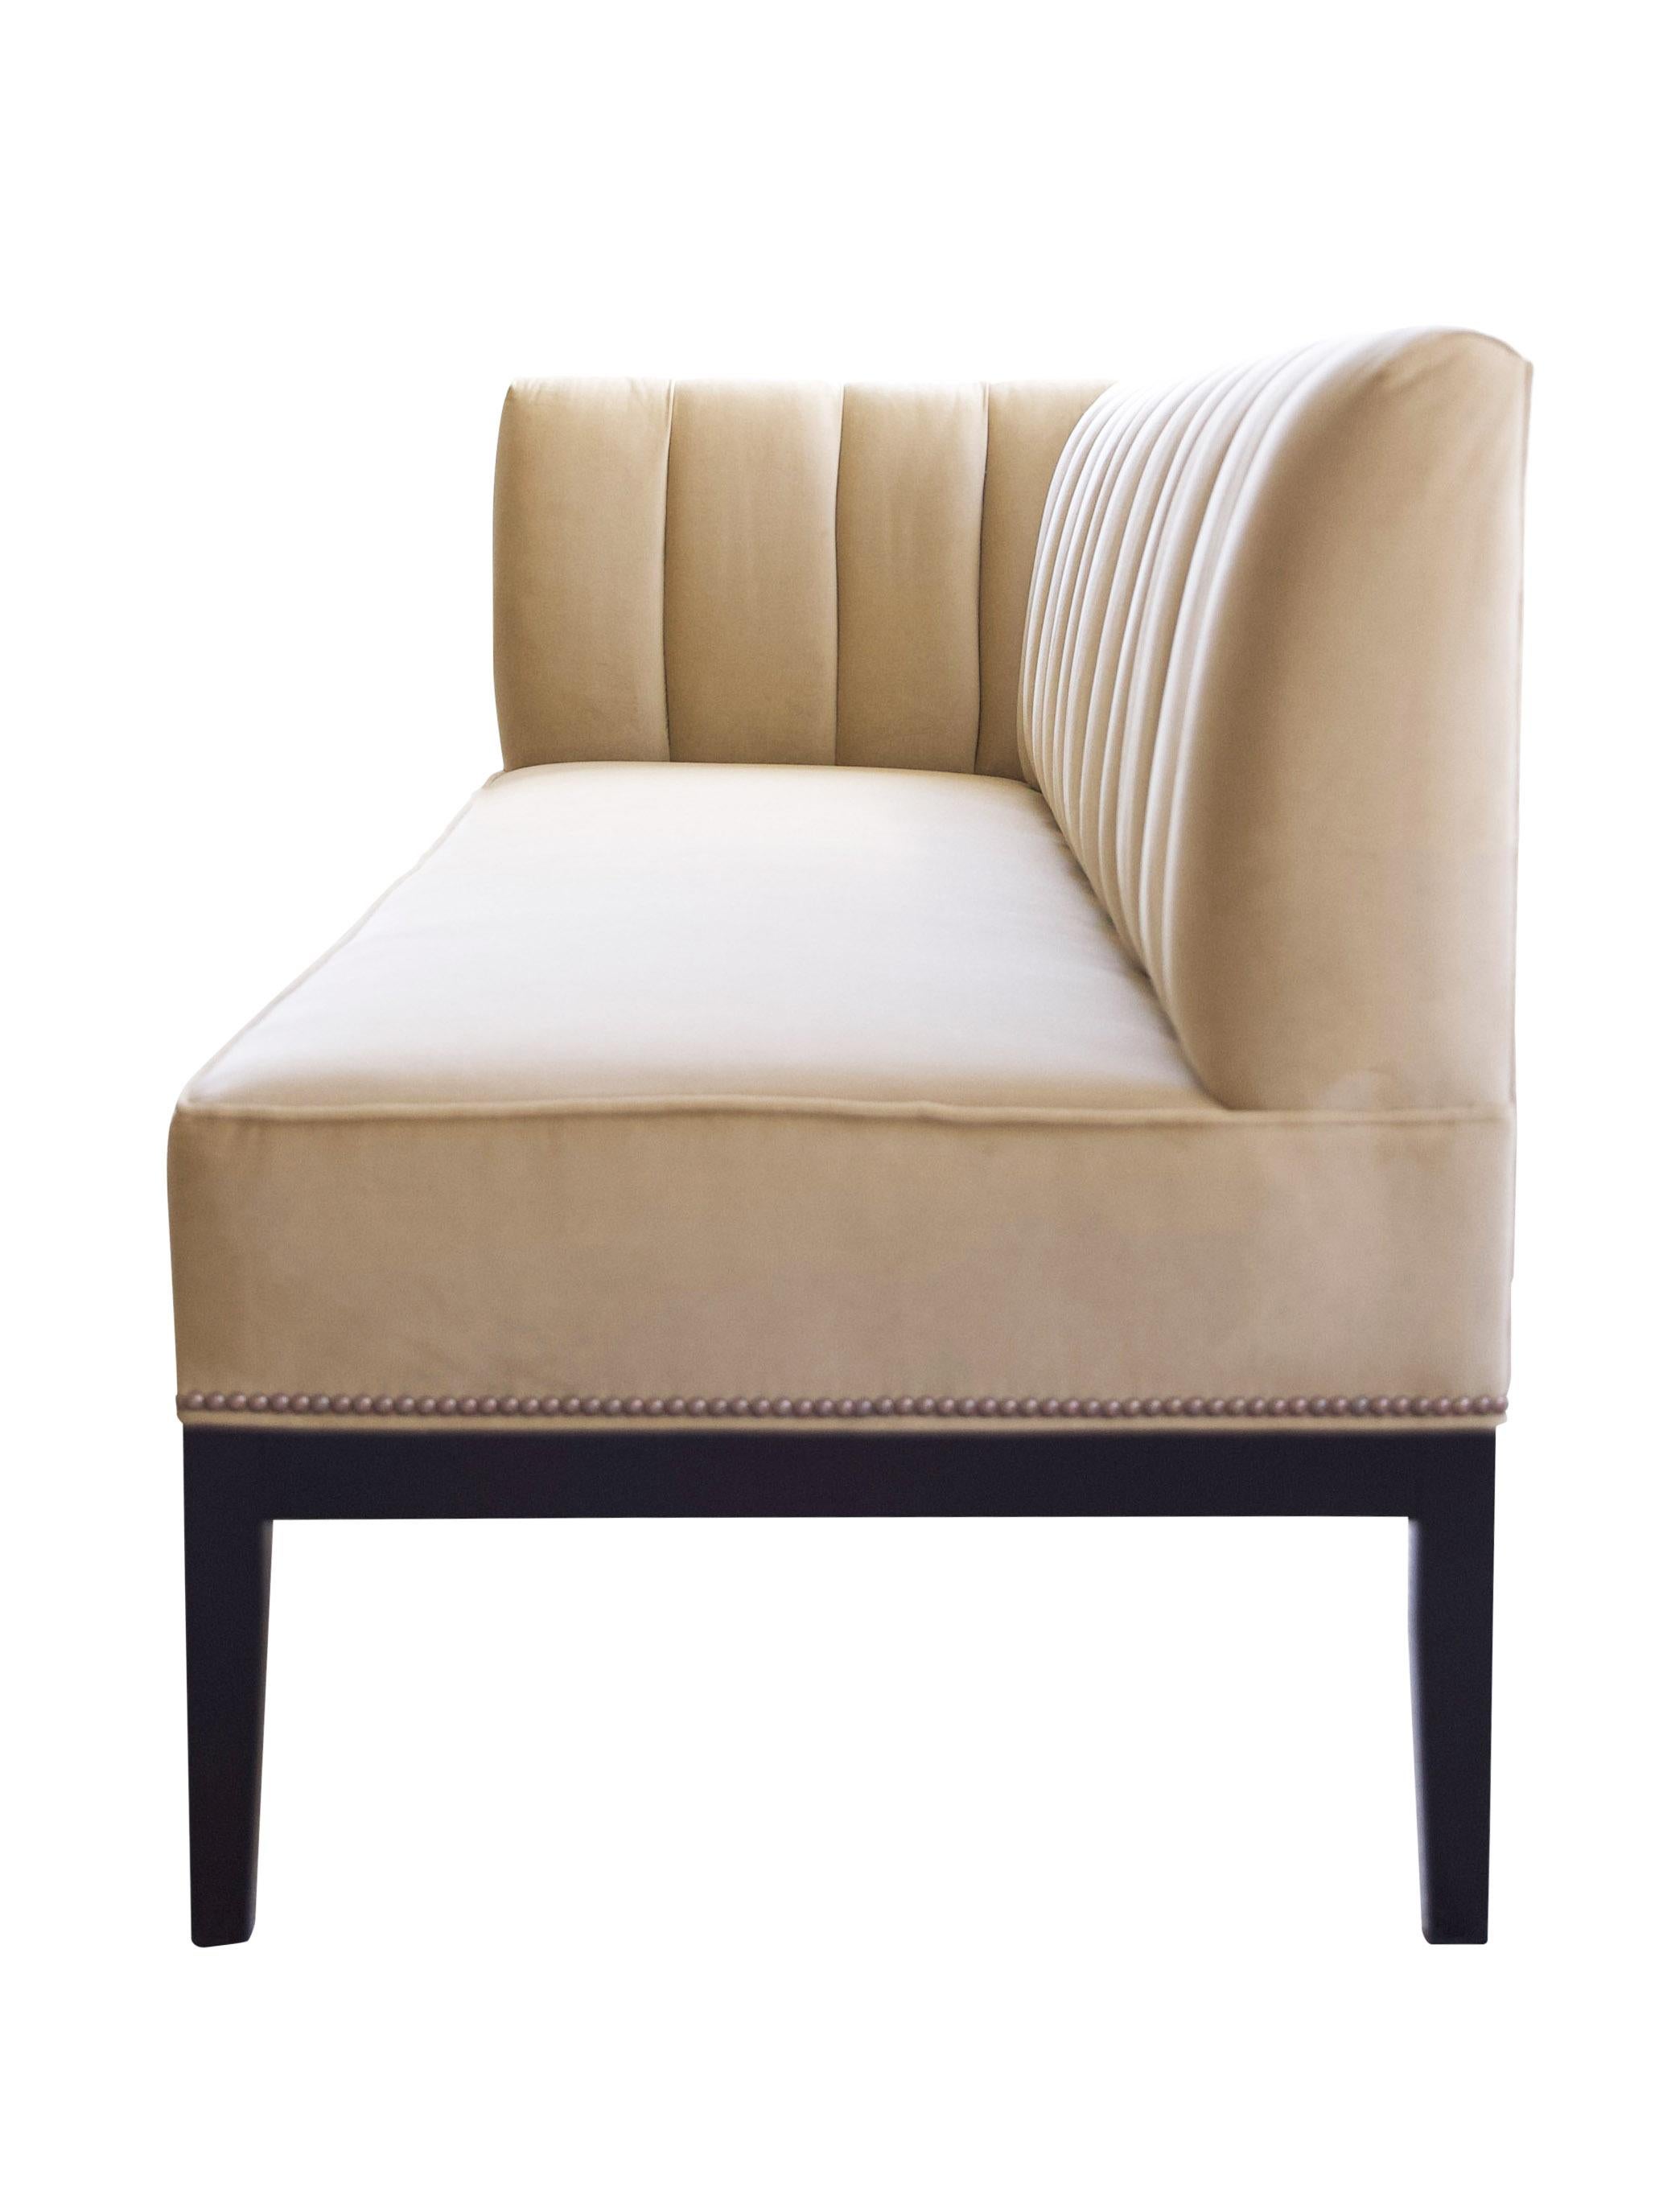 Lisa Tharp Collection  Channel Banquette 

Bring the glamour of an elegant restaurant booth home. Soft padded channels lend comfortable back support for lingering long after the meal. Left or right arm design cozies up to a corner, while the armless